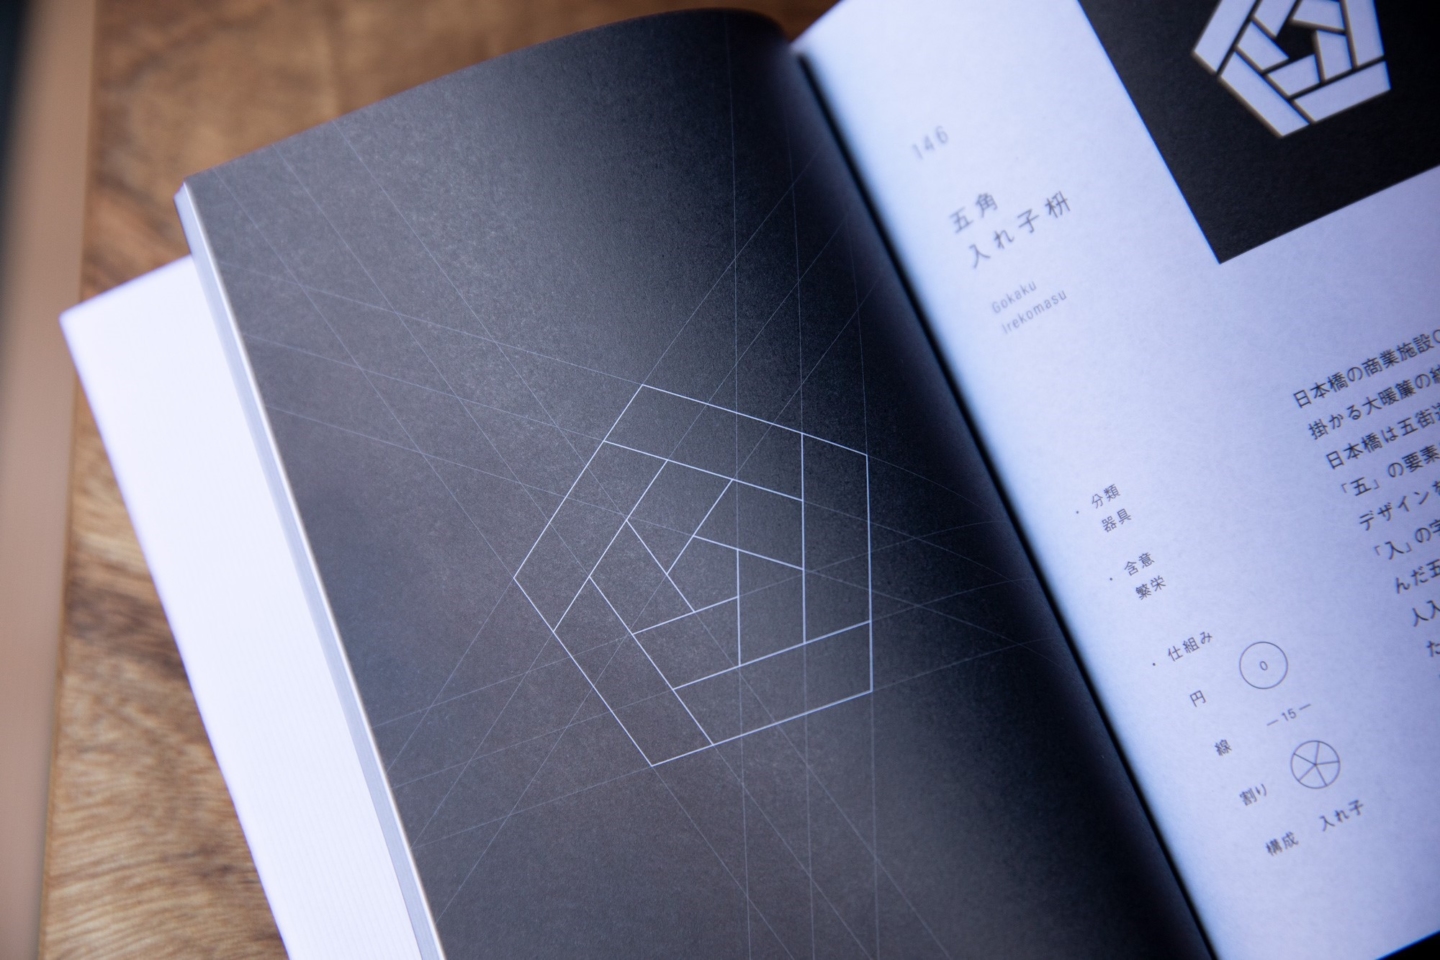 The intricacies of “Family Crest” designs, depicted in a single book.